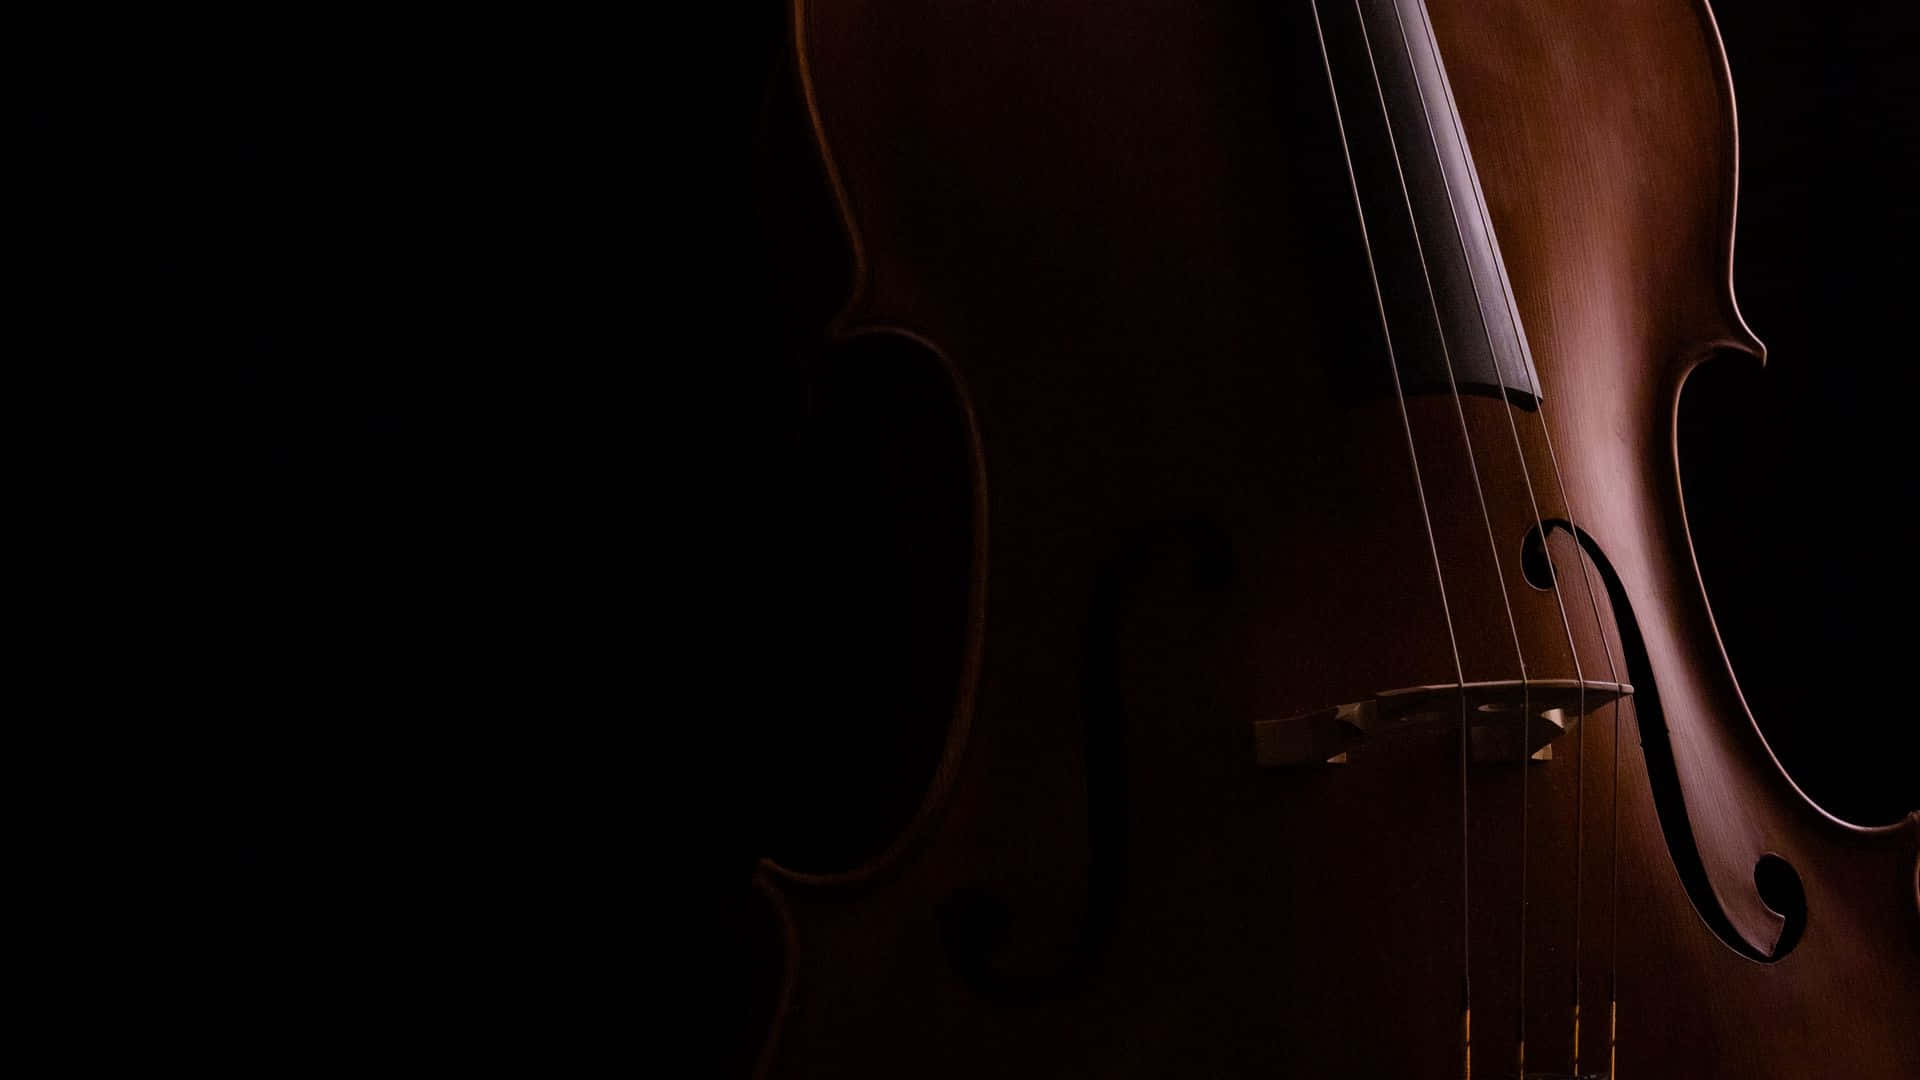 Violin Wallpapers HD Violin Backgrounds Free Images Download